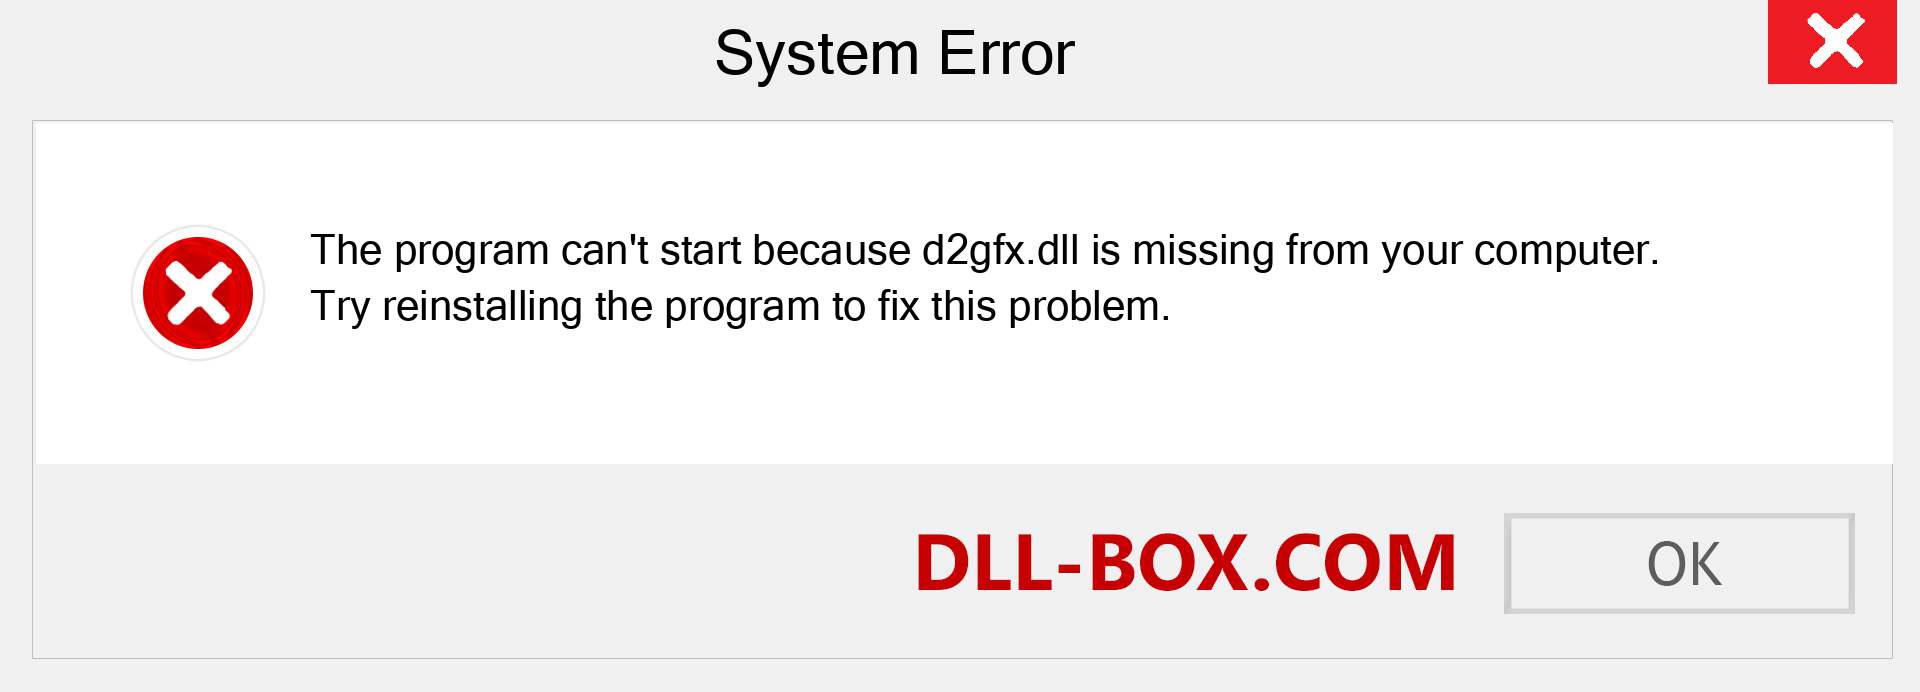  d2gfx.dll file is missing?. Download for Windows 7, 8, 10 - Fix  d2gfx dll Missing Error on Windows, photos, images